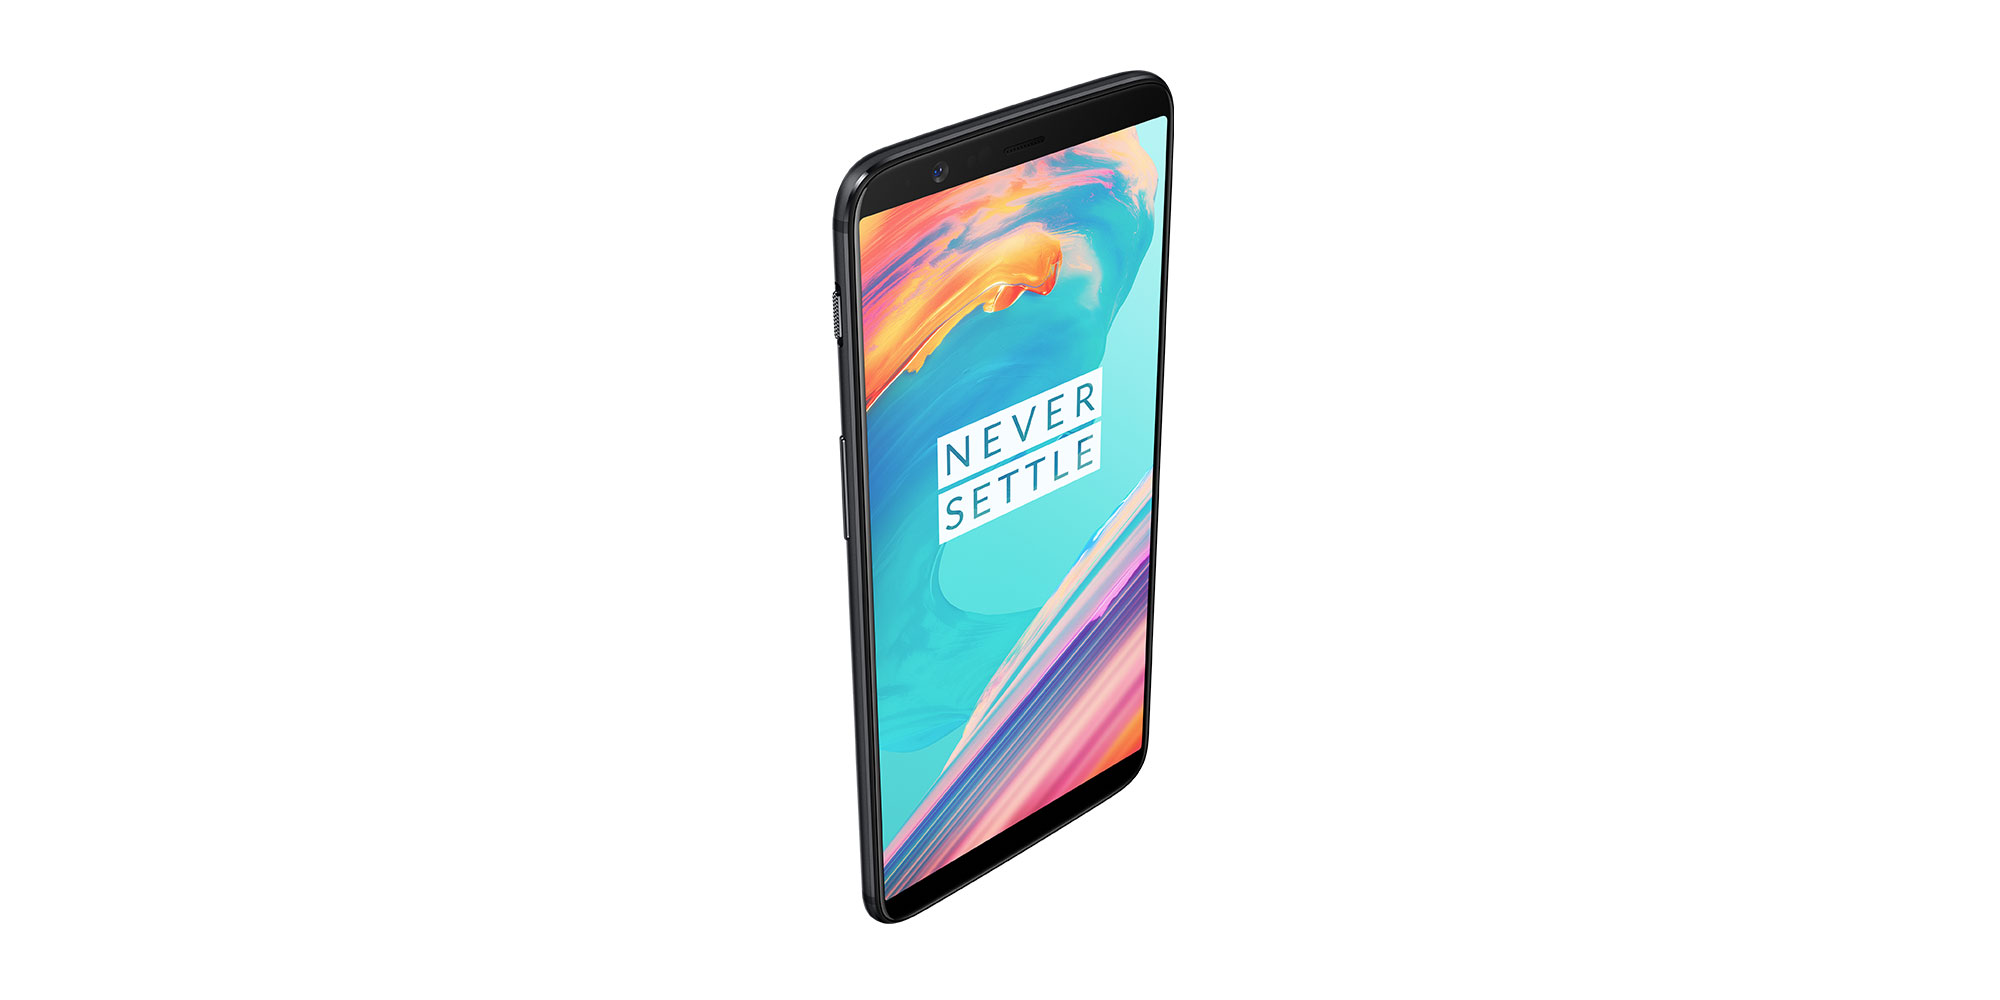 How to take a screenshot on the OnePlus 5T